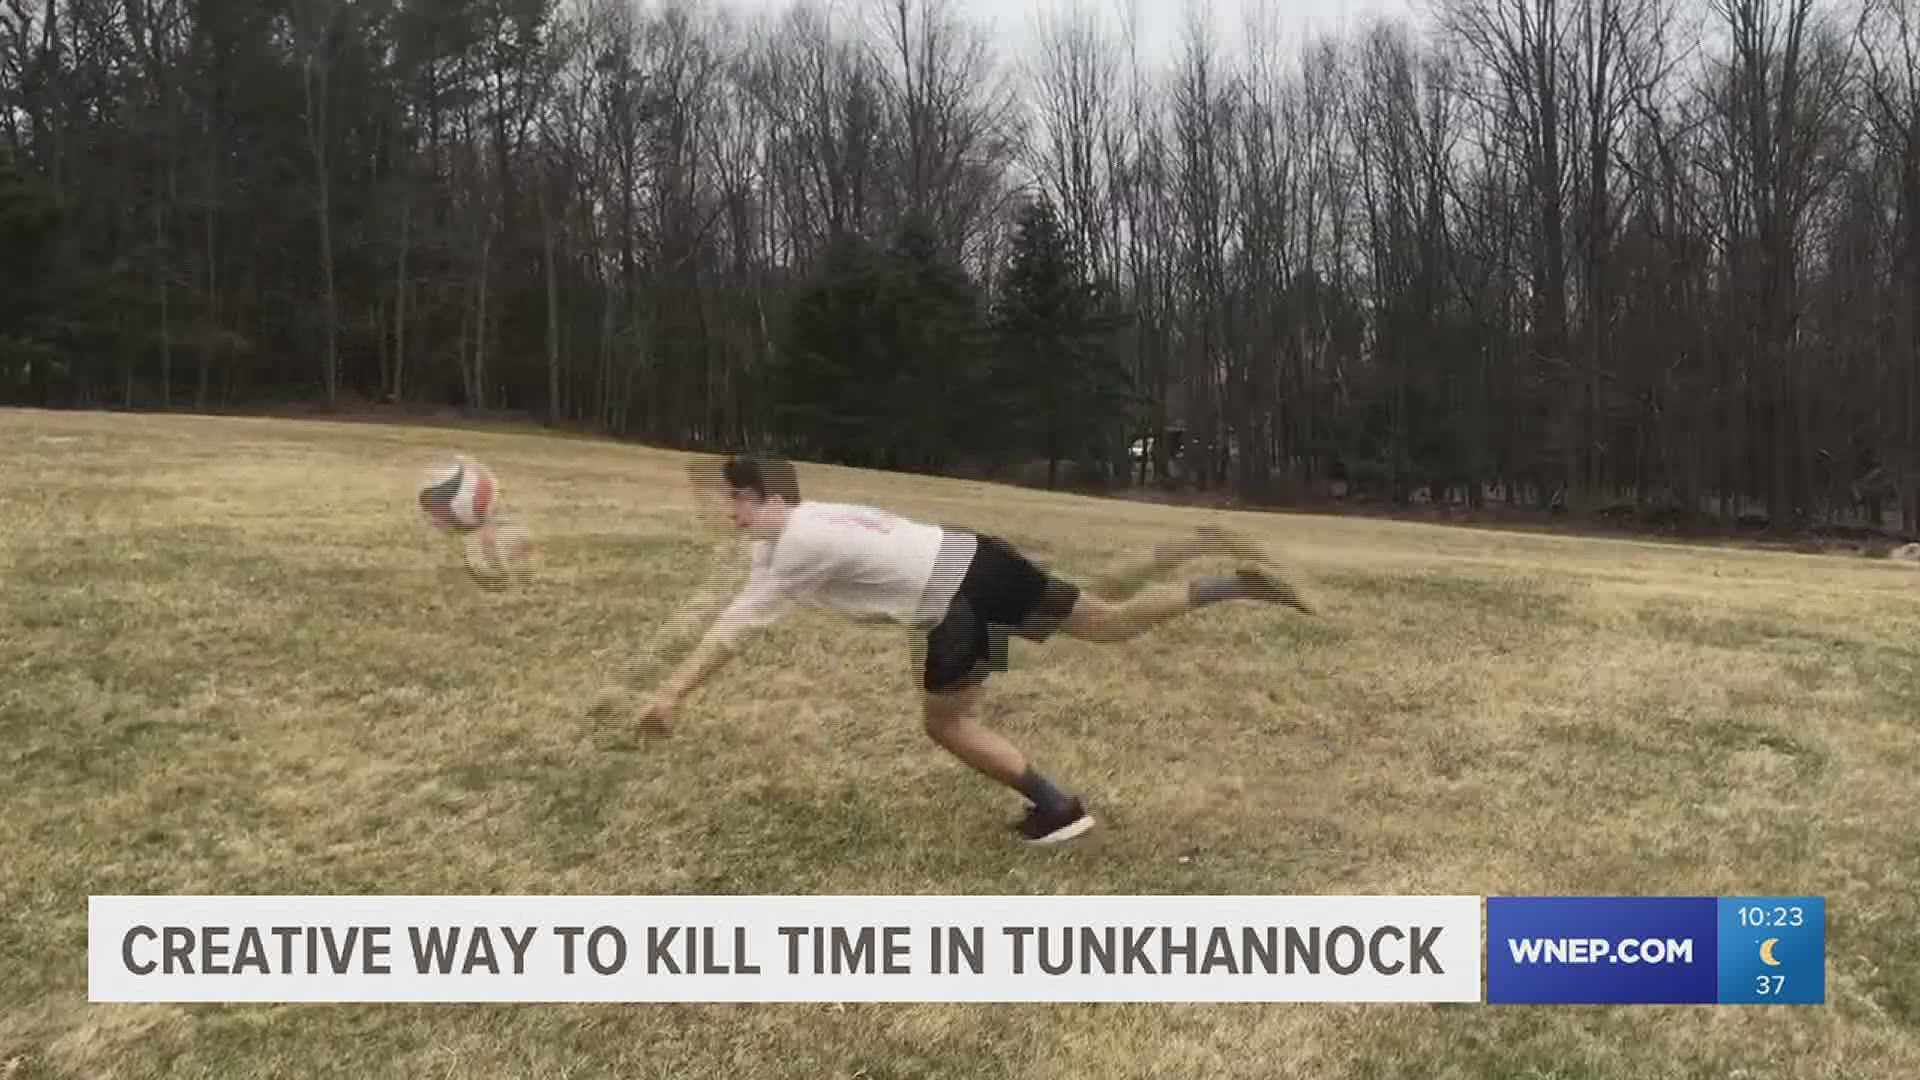 How one senior found a creative way to kill time in Tunkhannock